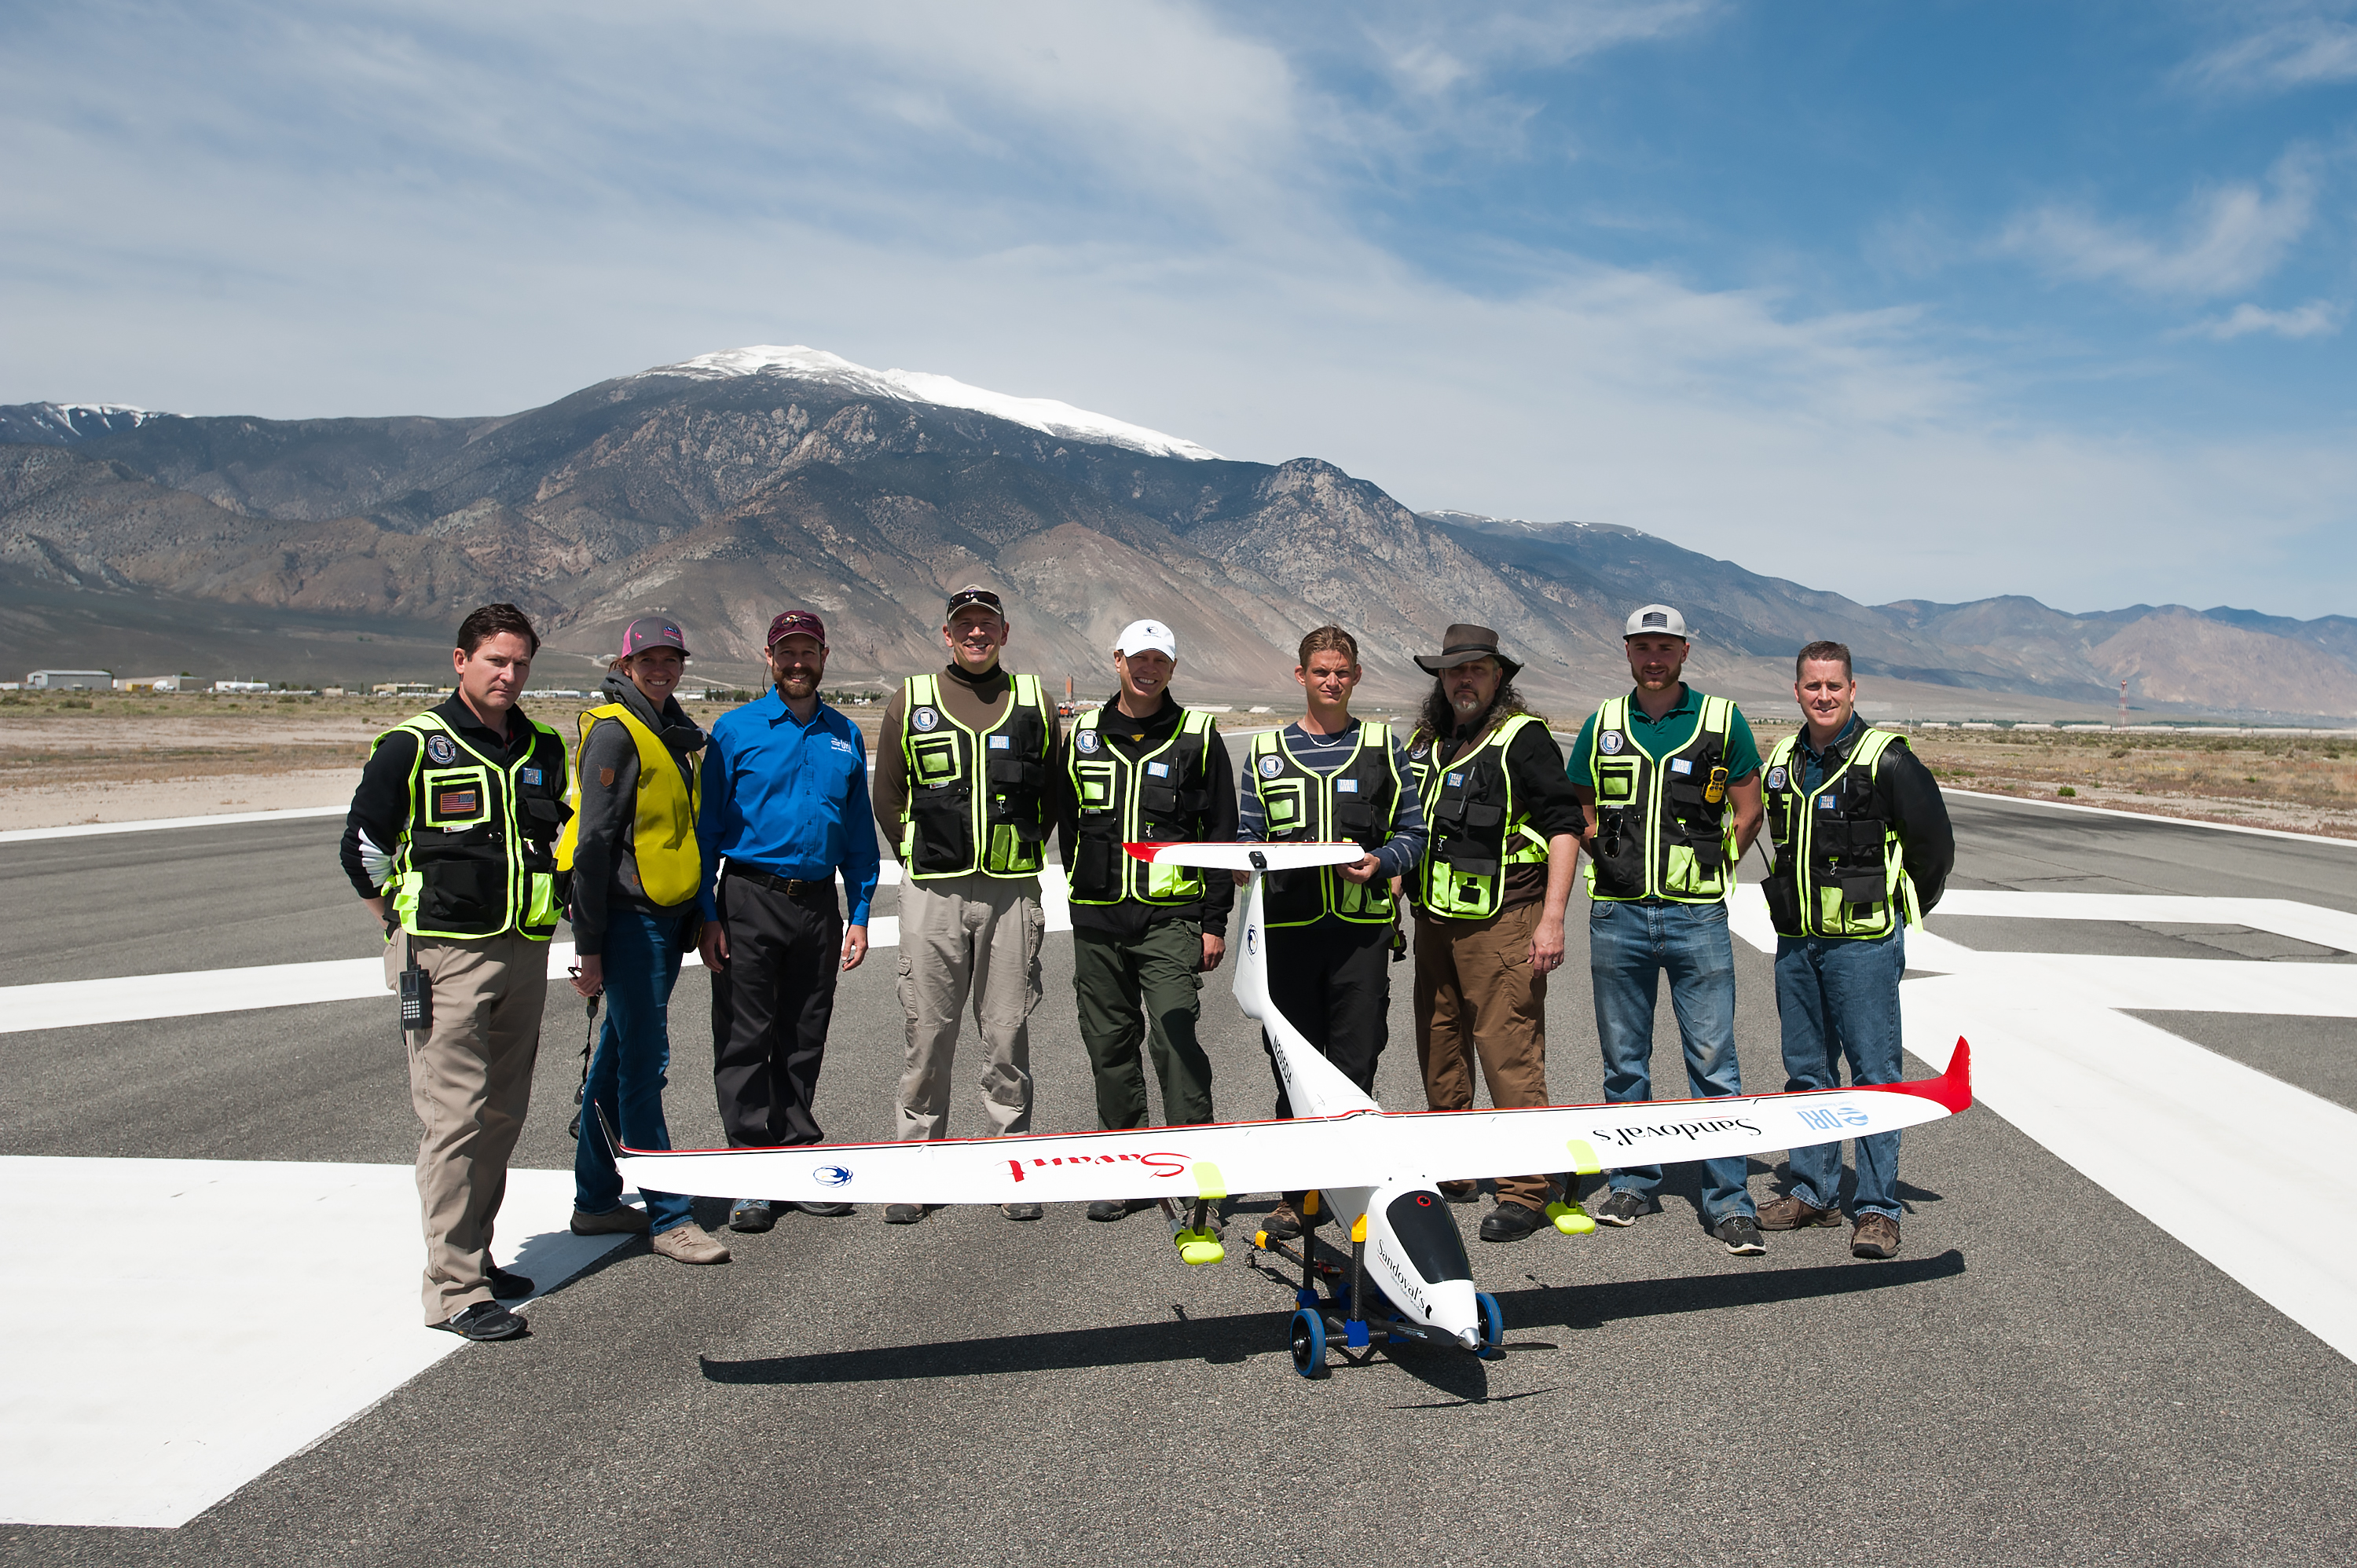 Cloud seeding drone could help mitigate drought in Nevada